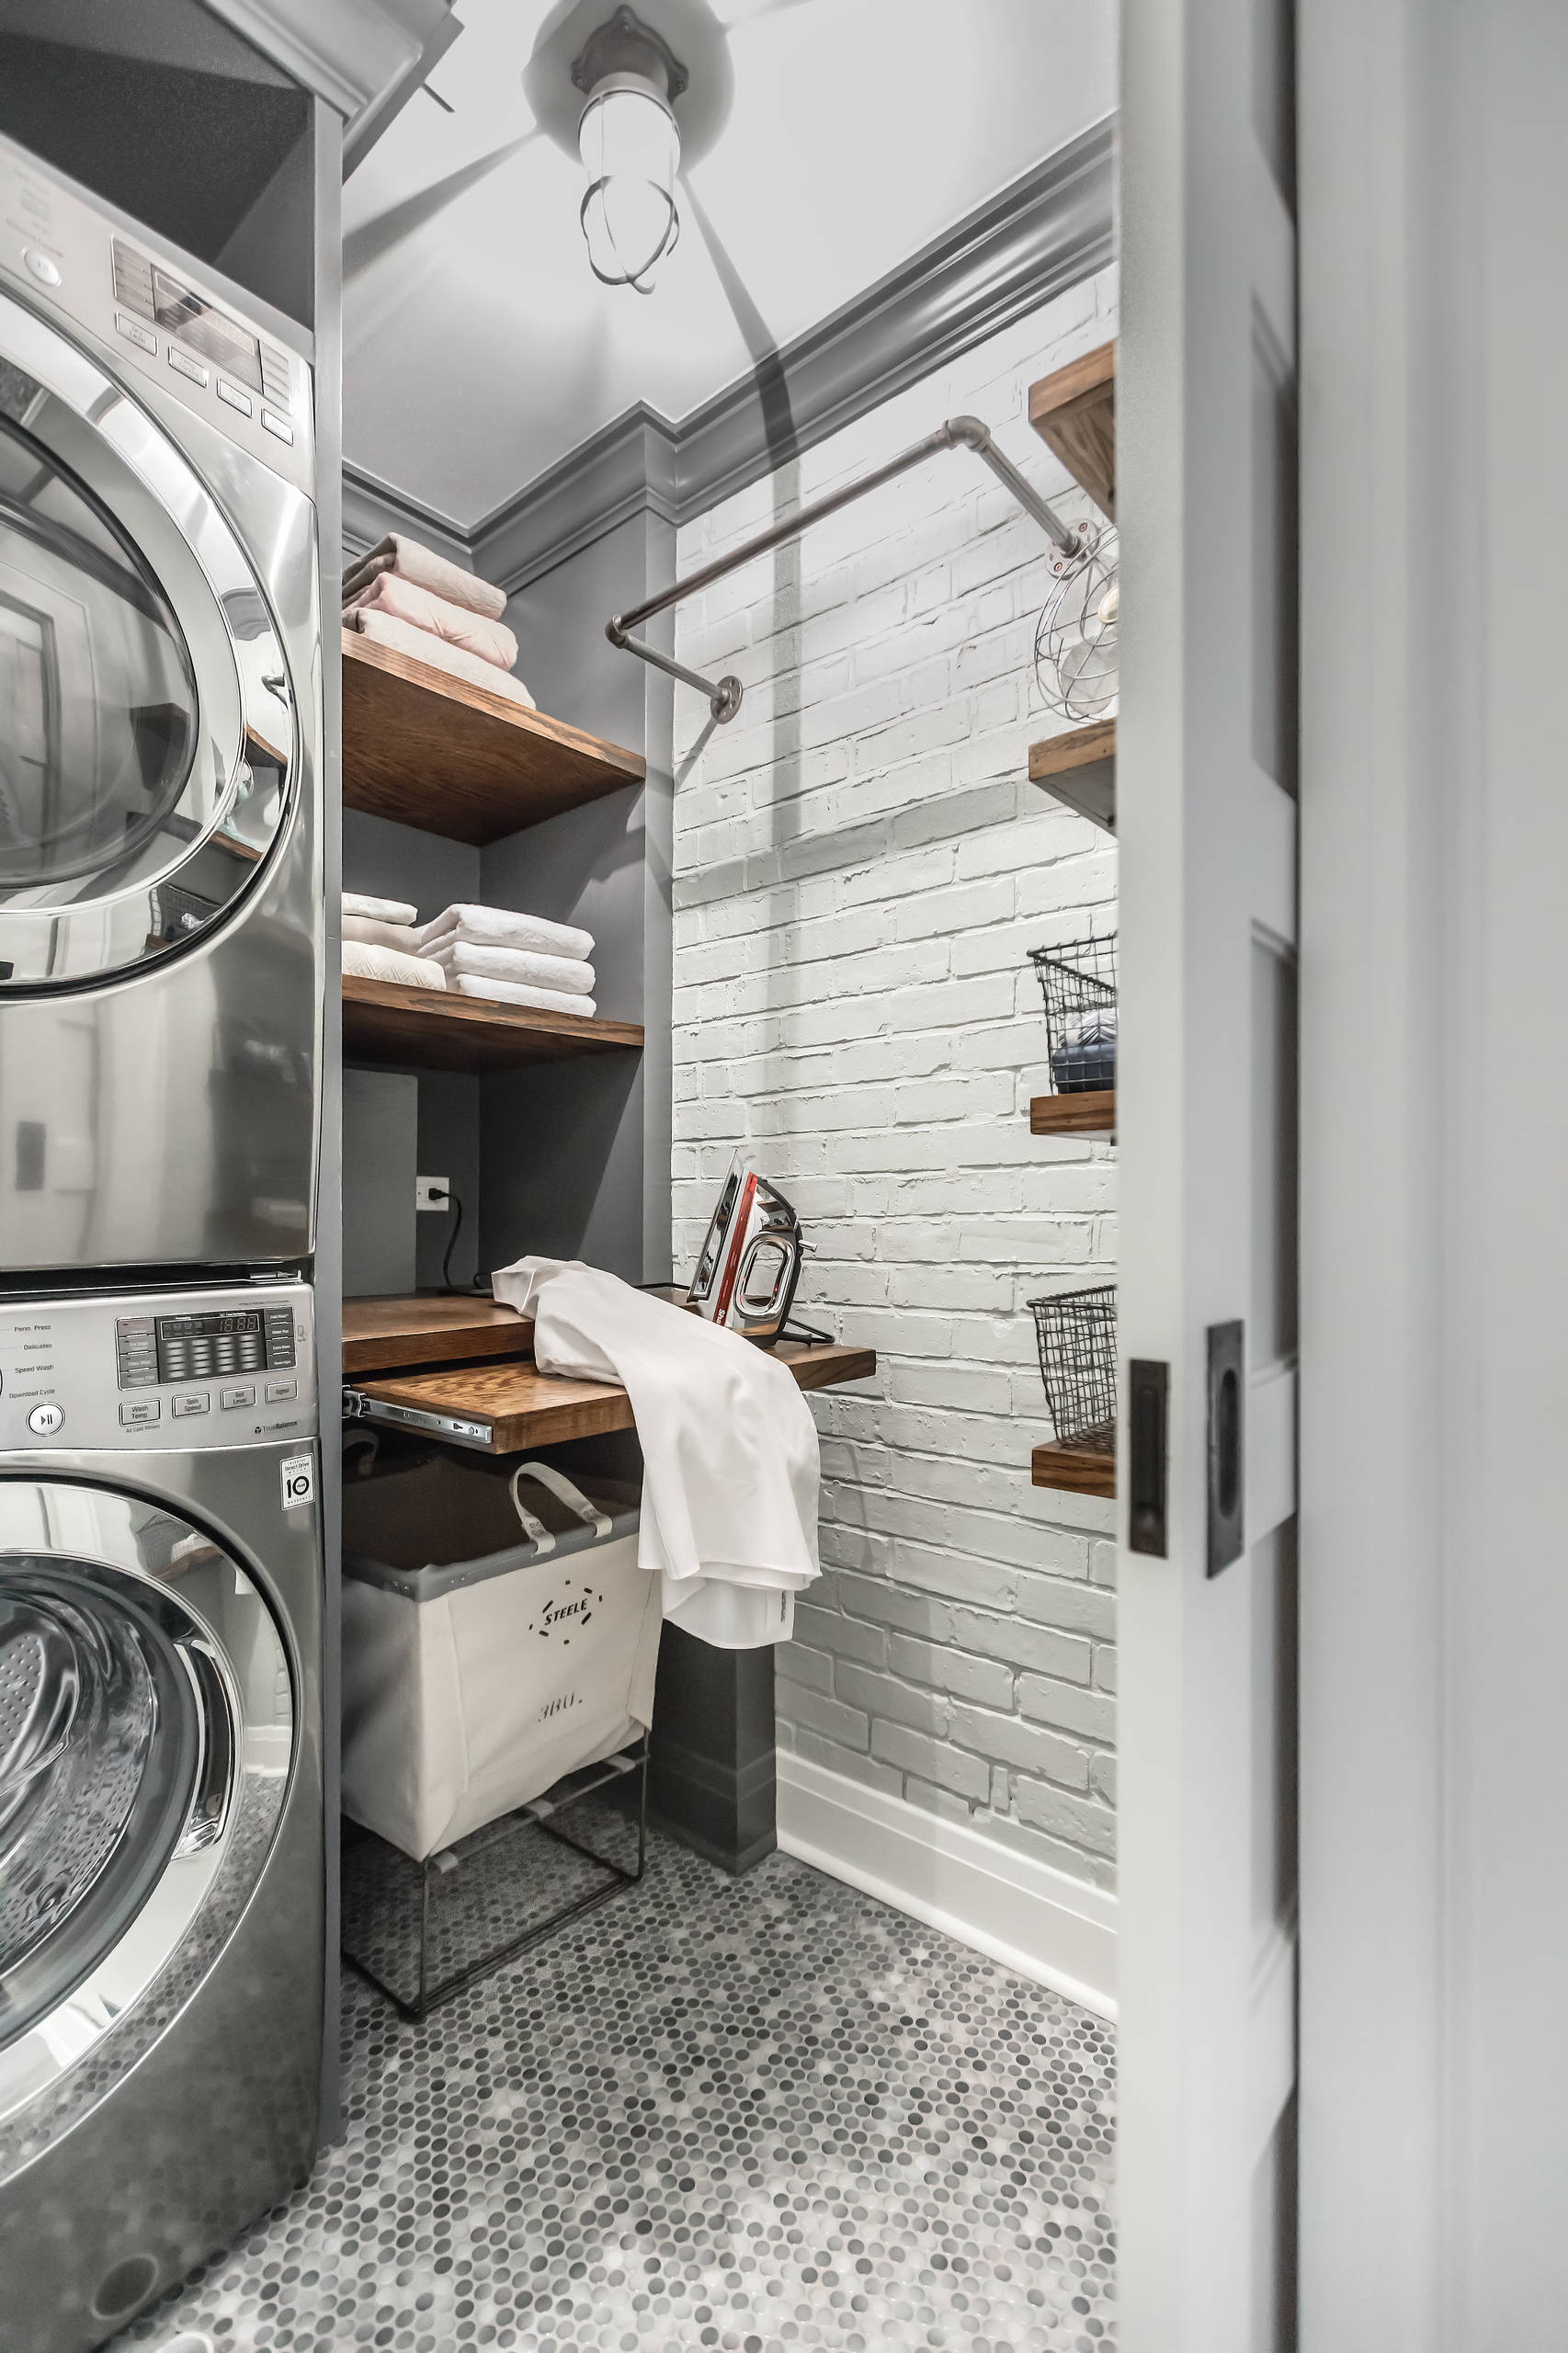 75 Laundry Room Ideas You'll Love - July, 2023 | Houzz